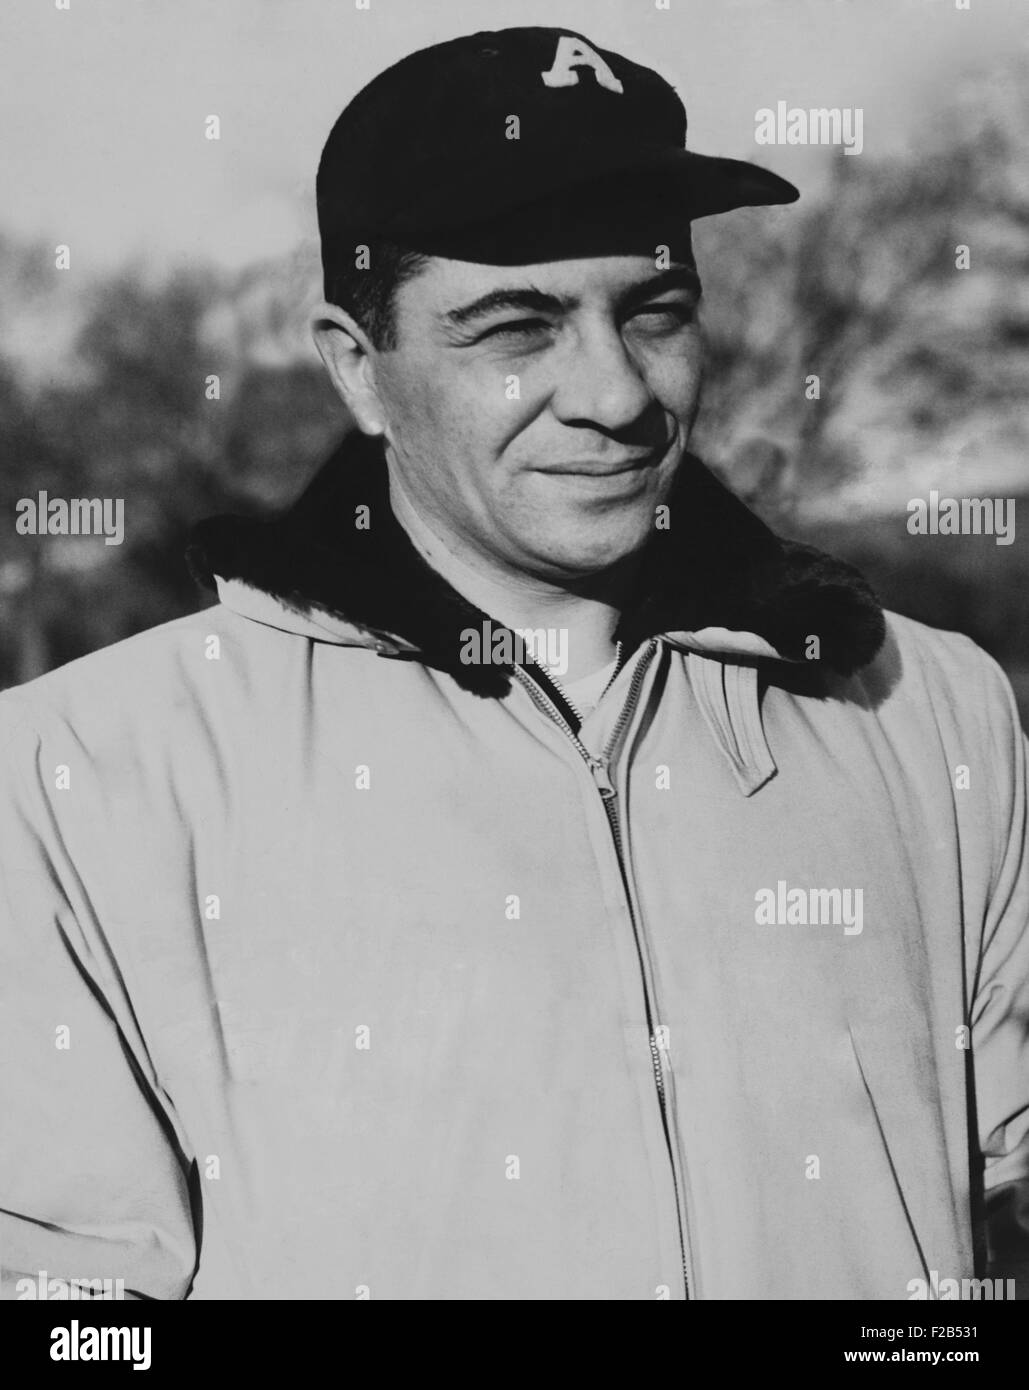 Vince Lombardi when he was coach on New York Giants football team. Dec. 3, 1954. - (BSLOC 2015 1 116) Stock Photo